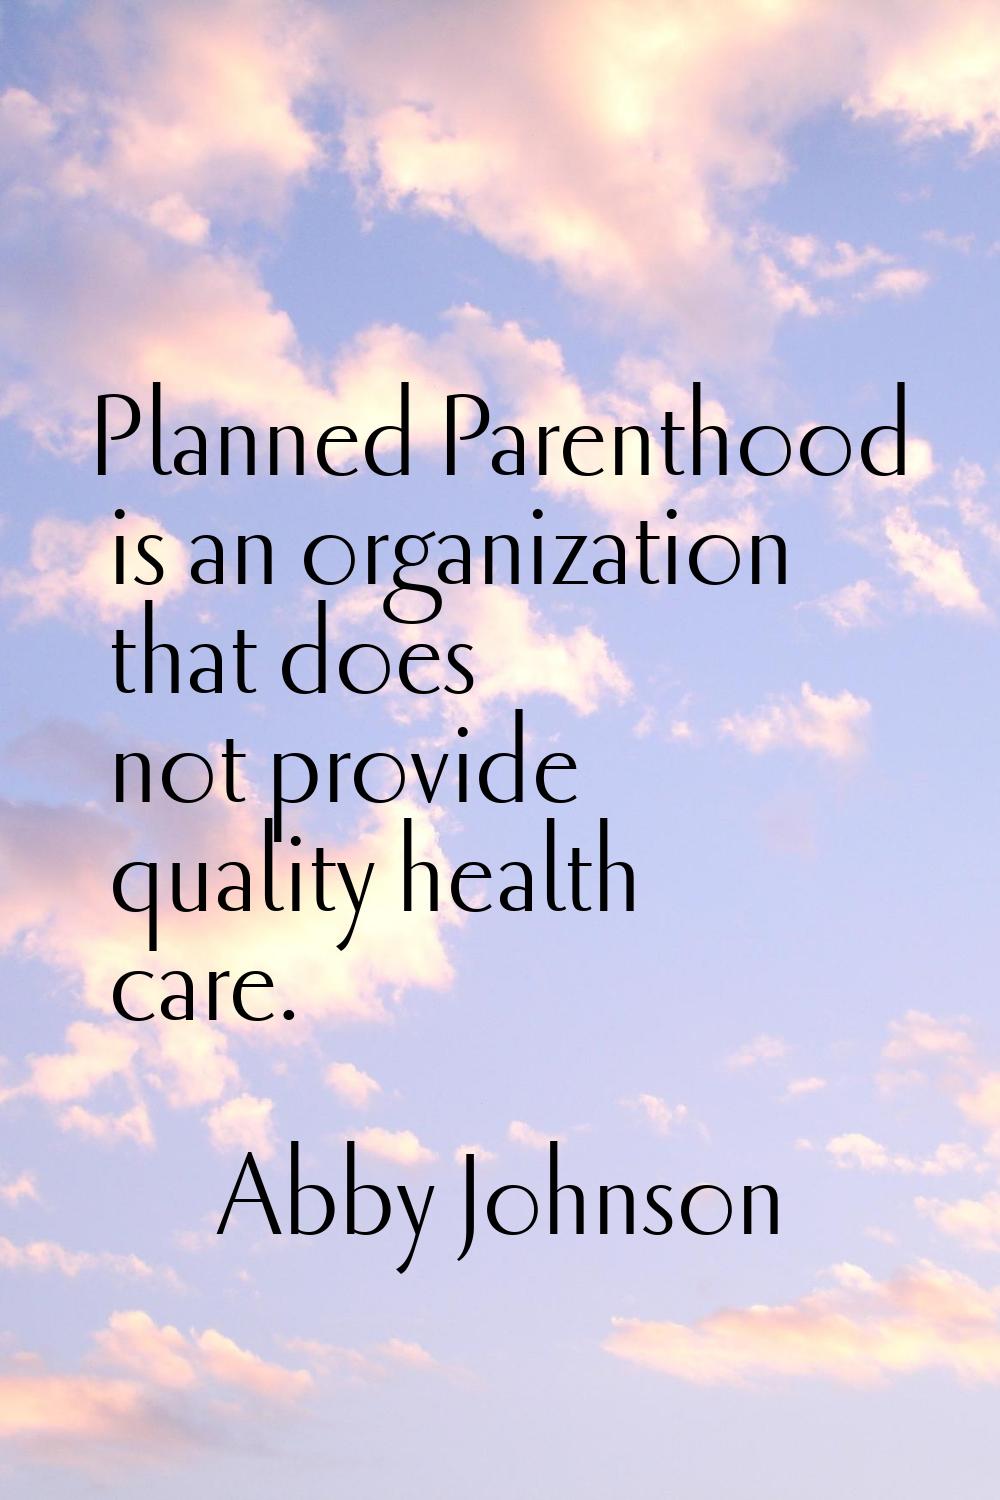 Planned Parenthood is an organization that does not provide quality health care.